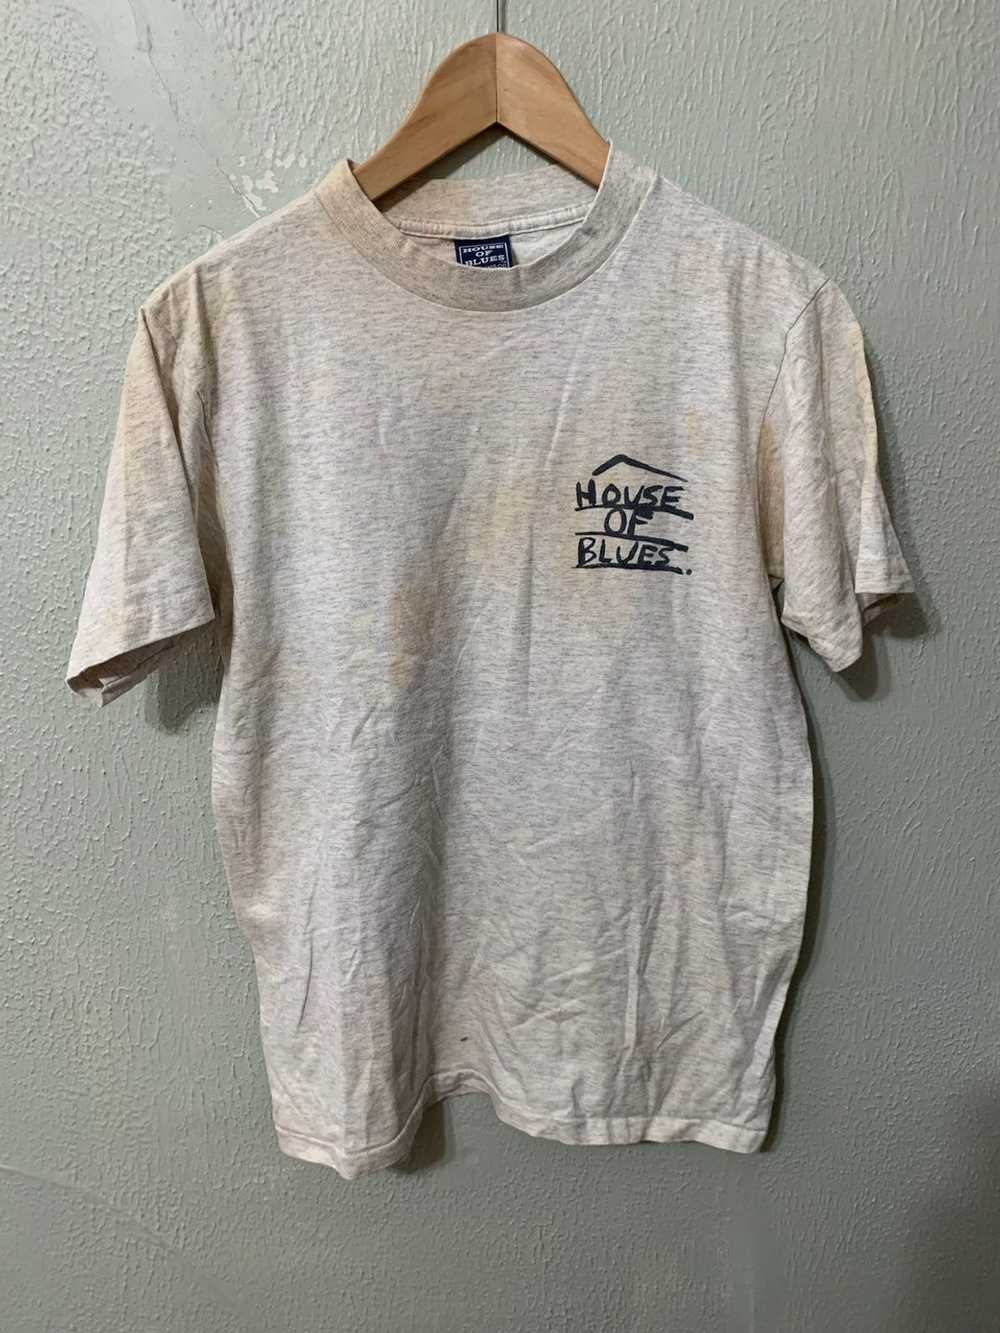 Vintage Vintage House of Blues Grey Stained Tee - image 1